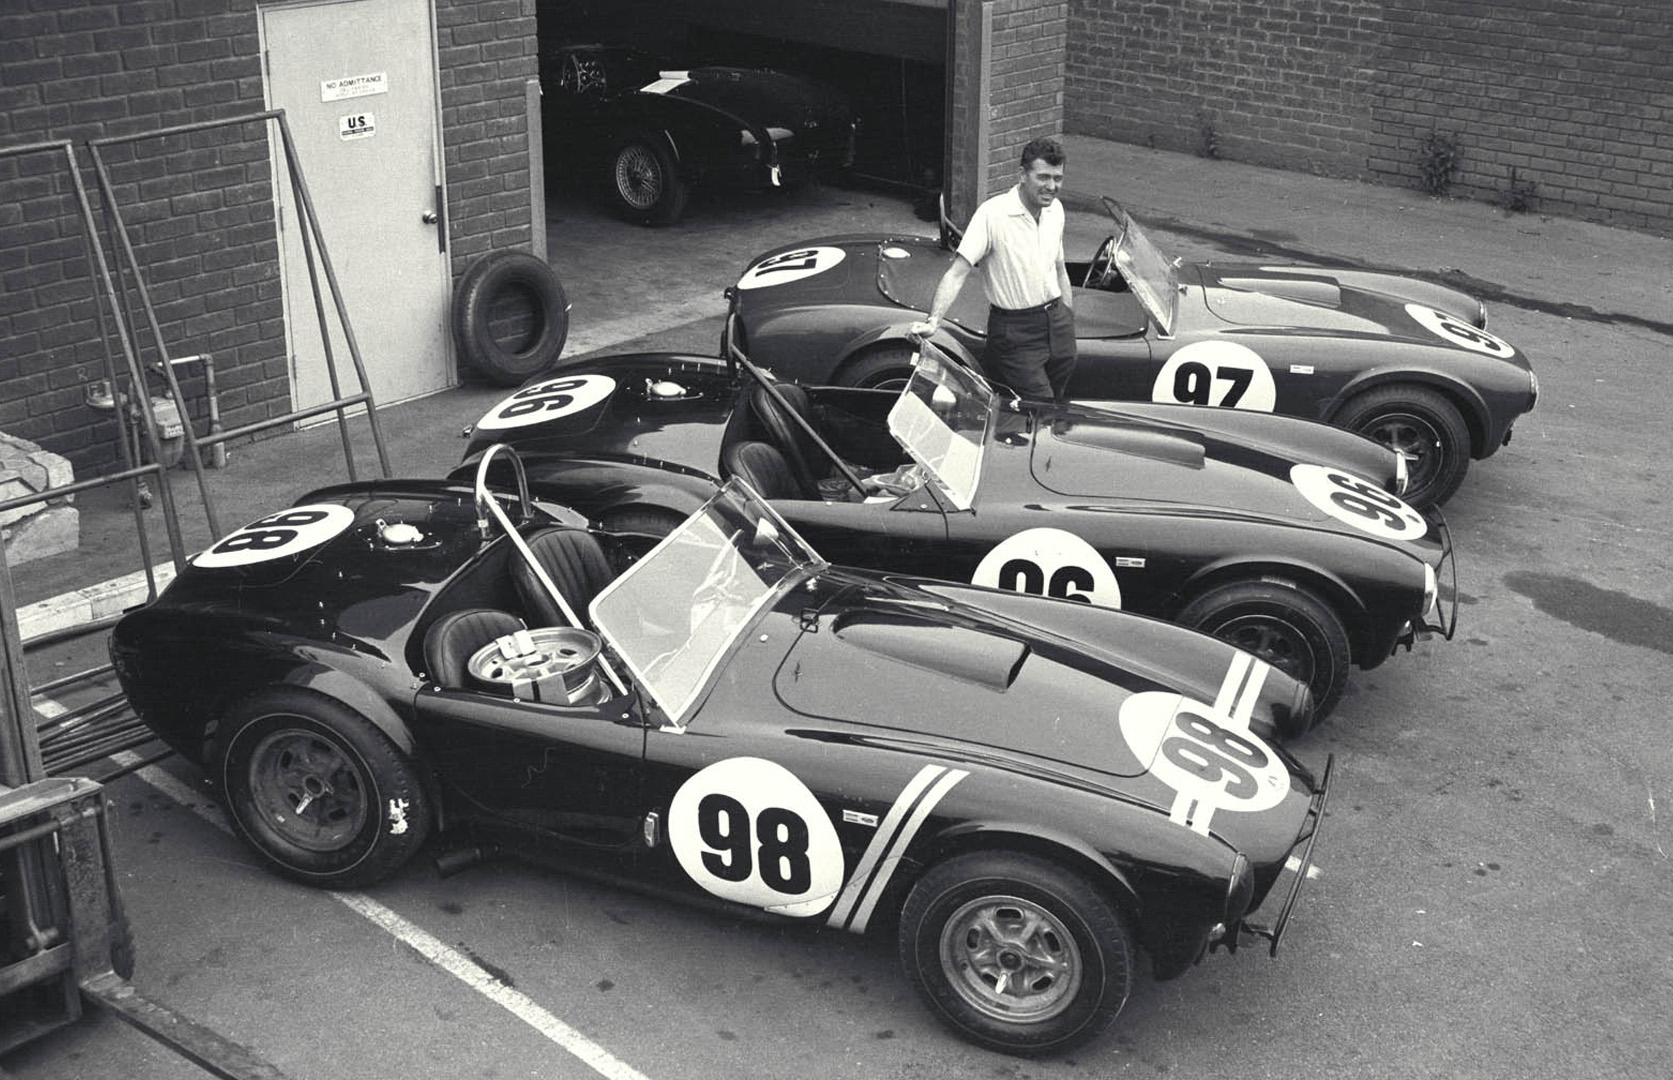 The AC Cobra and Carroll Shelby 